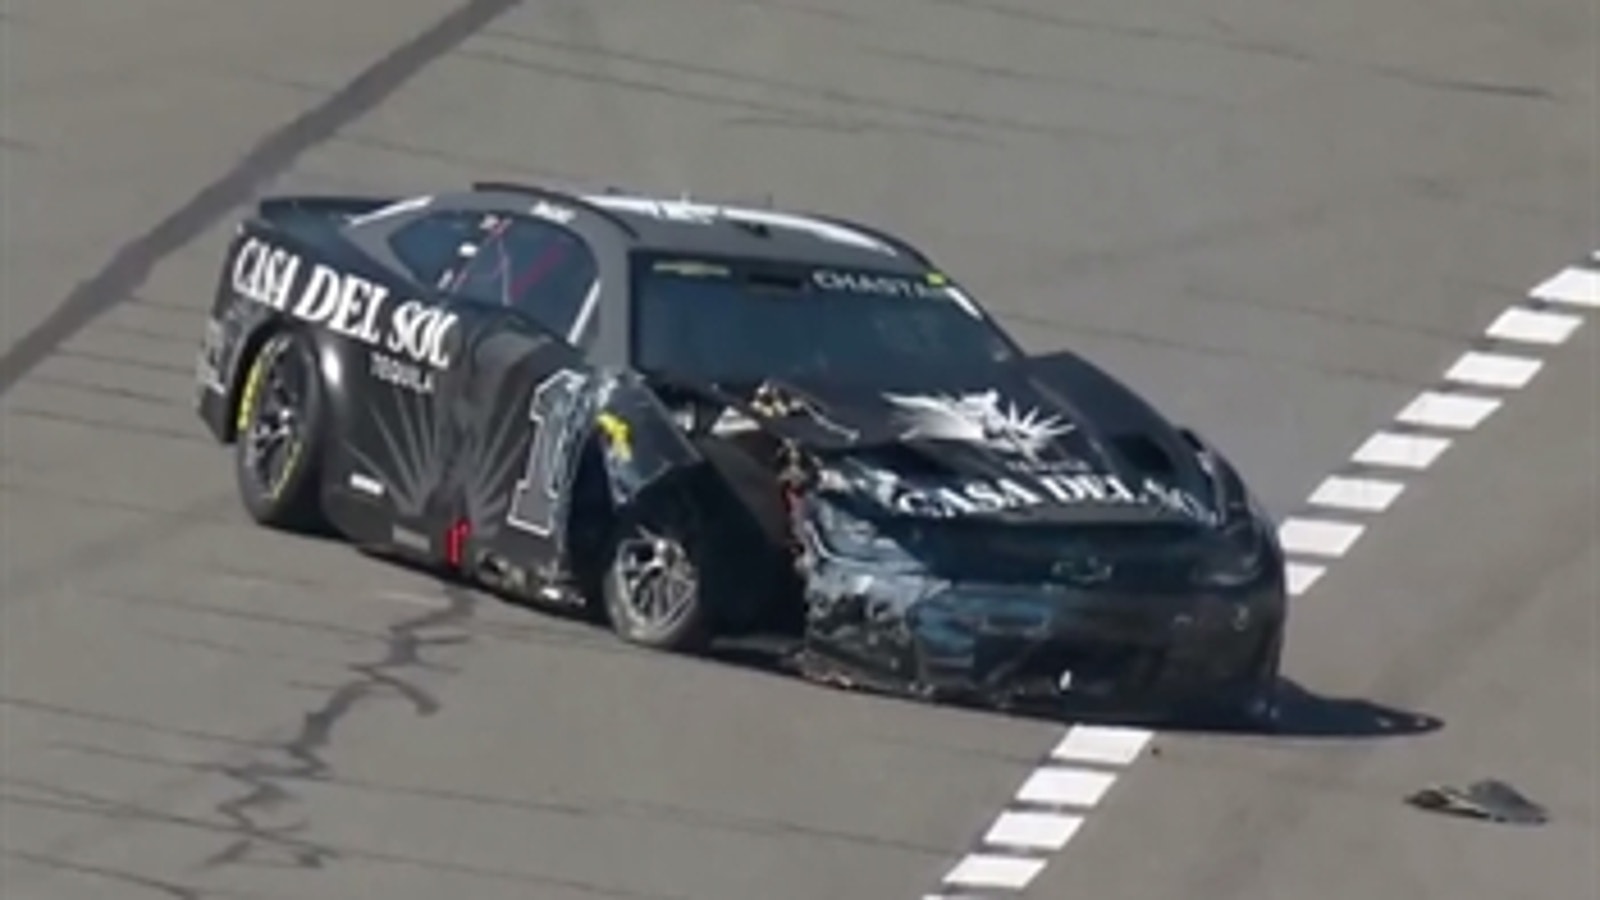 Ross Chastain slams the wall in practice at Fontana